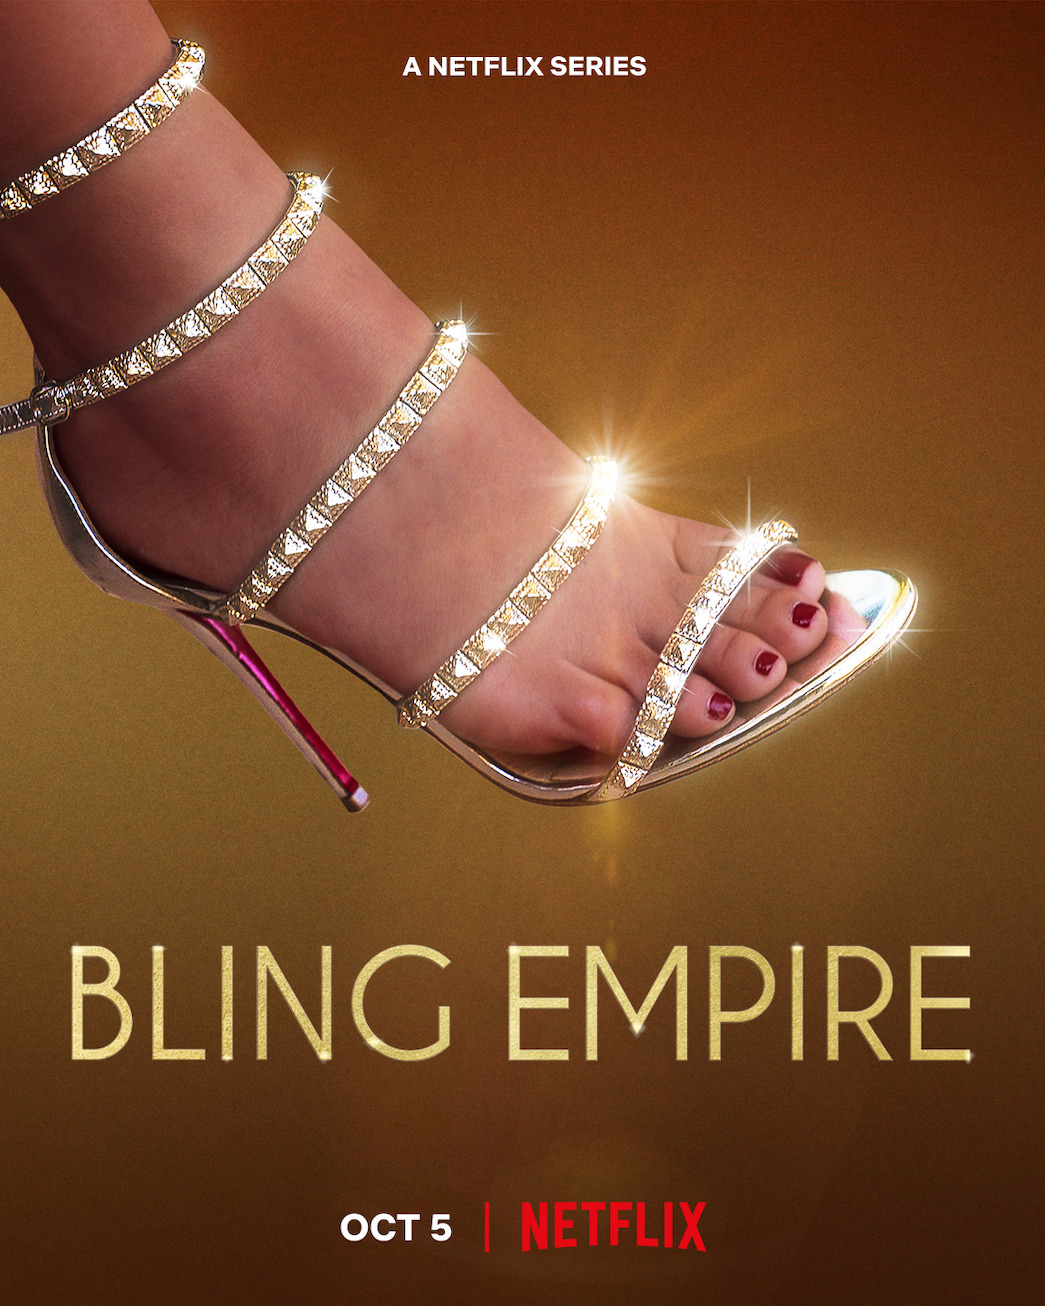 Bling Empire Season 3: Release Date, Cast, Trailer, and everything we know so far 